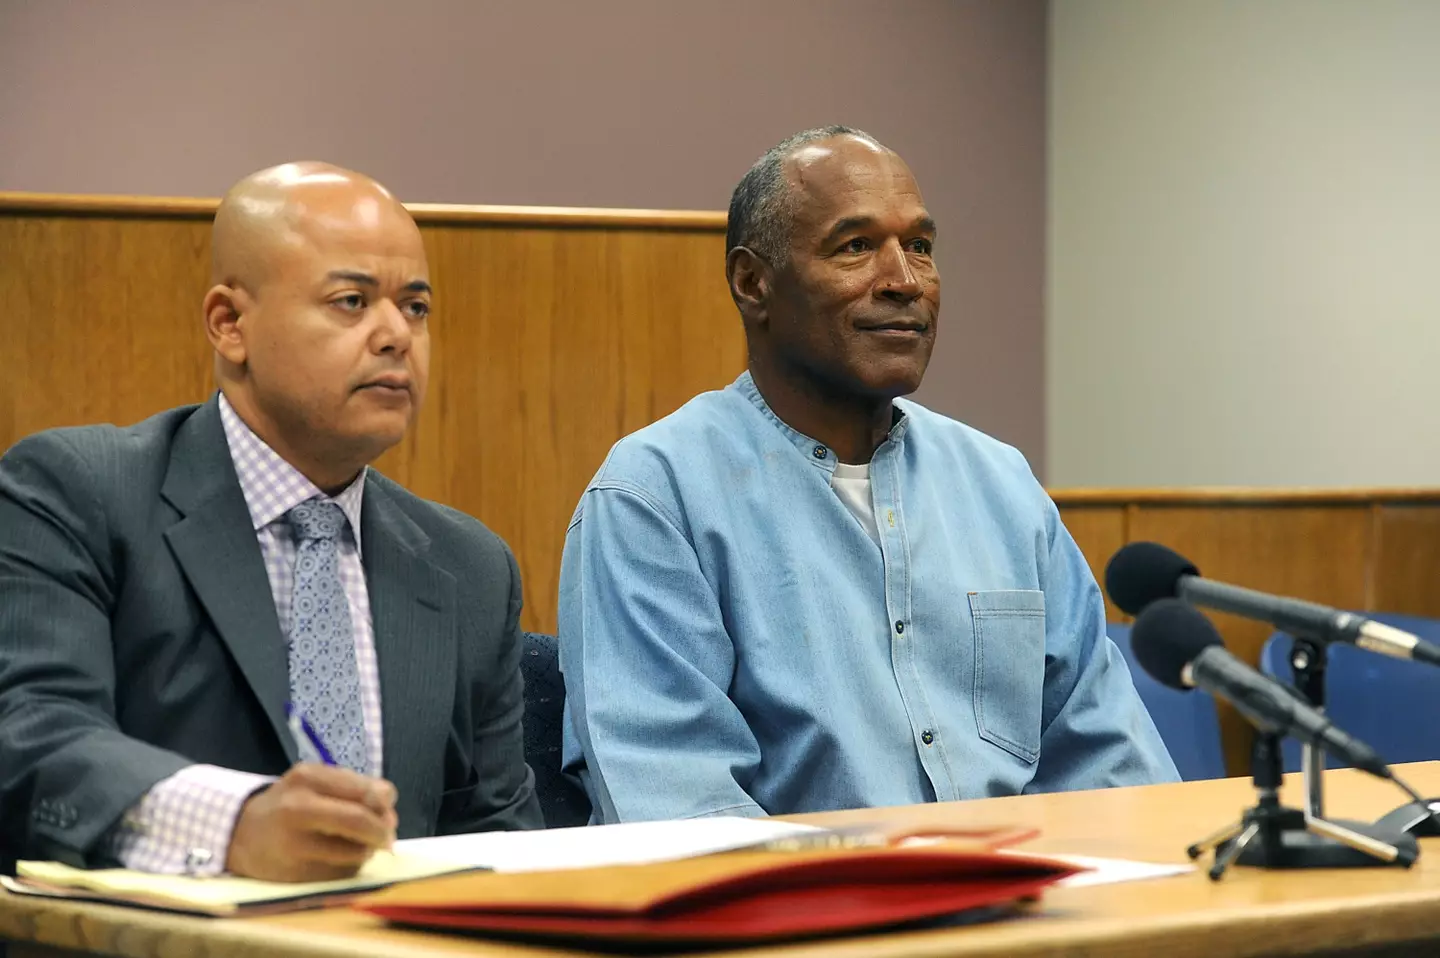 OJ Simpson was acquitted in the criminal trial. (Jason Bean-Pool/Getty Images)